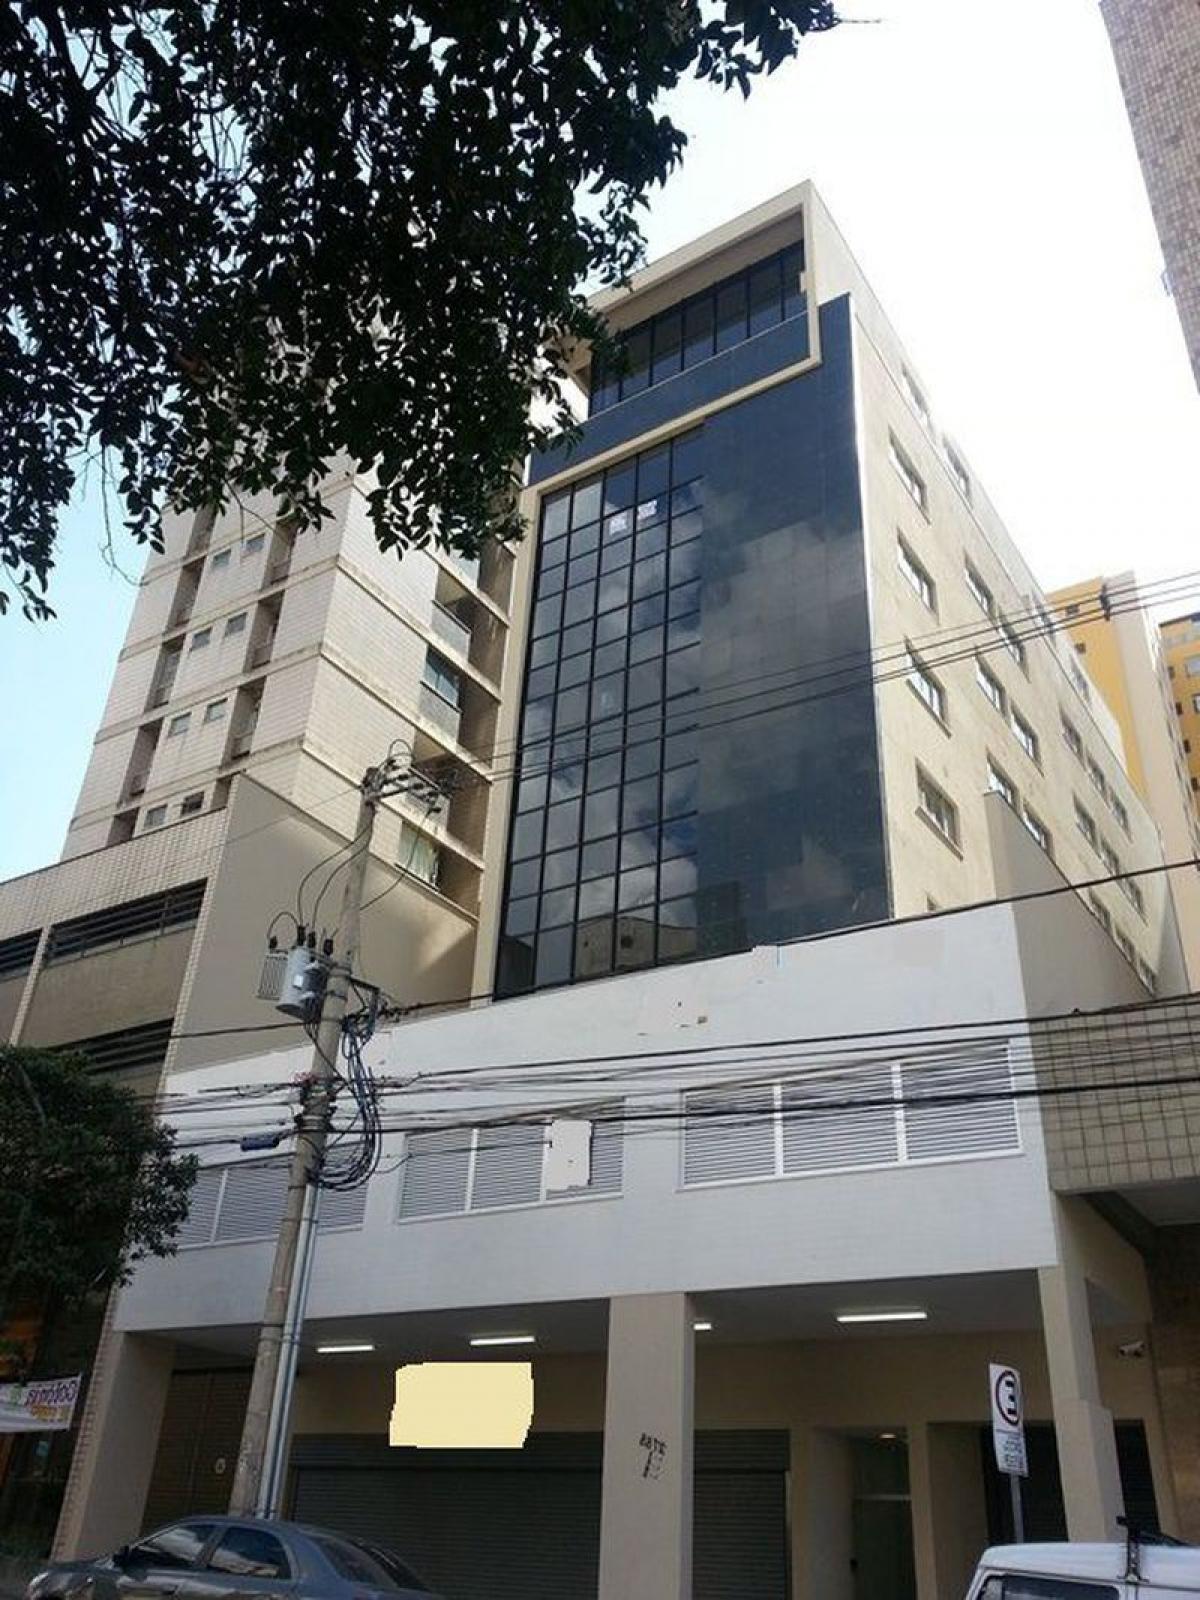 Picture of Commercial Building For Sale in Belo Horizonte, Minas Gerais, Brazil